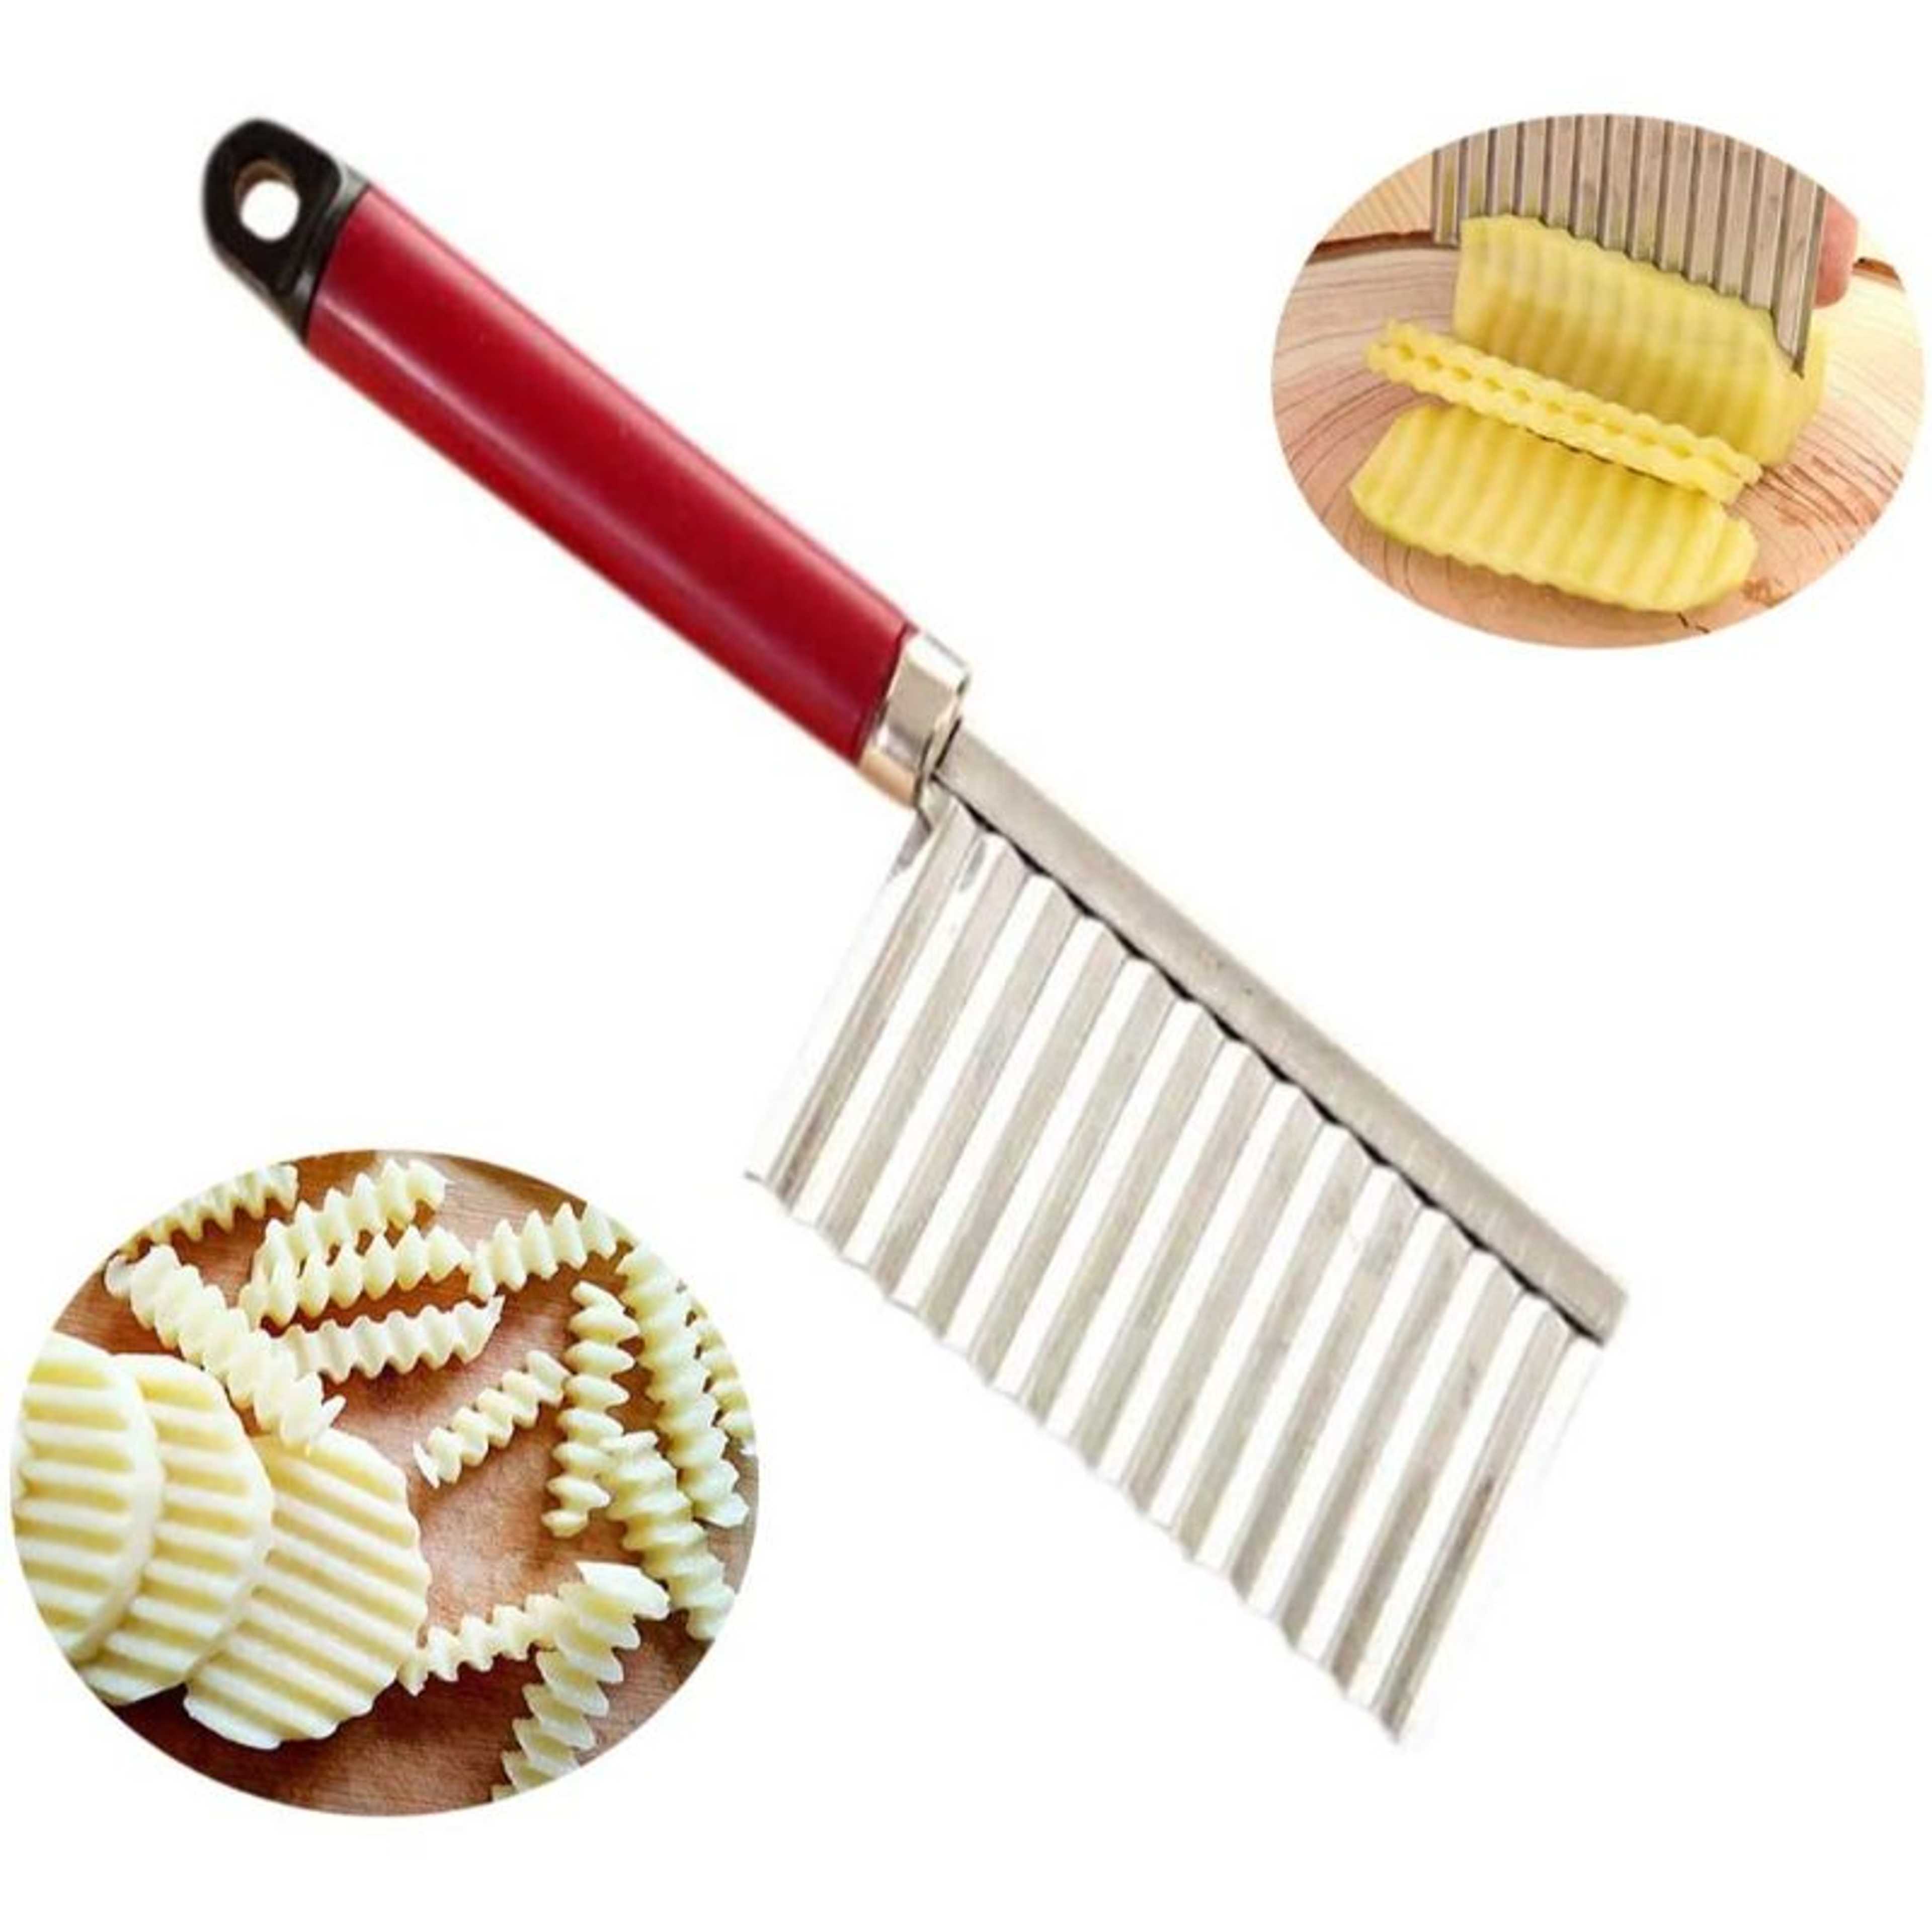 Multifunctional Stainless Steel Potato Wavy Cutter Crinkle Chip Cutter Potato Slicer Stainless Steel Corrugated Knife Wavy Cutter French Fry Cutter Kitchen Gadget Cucumber Carrot Fruit Vegetable